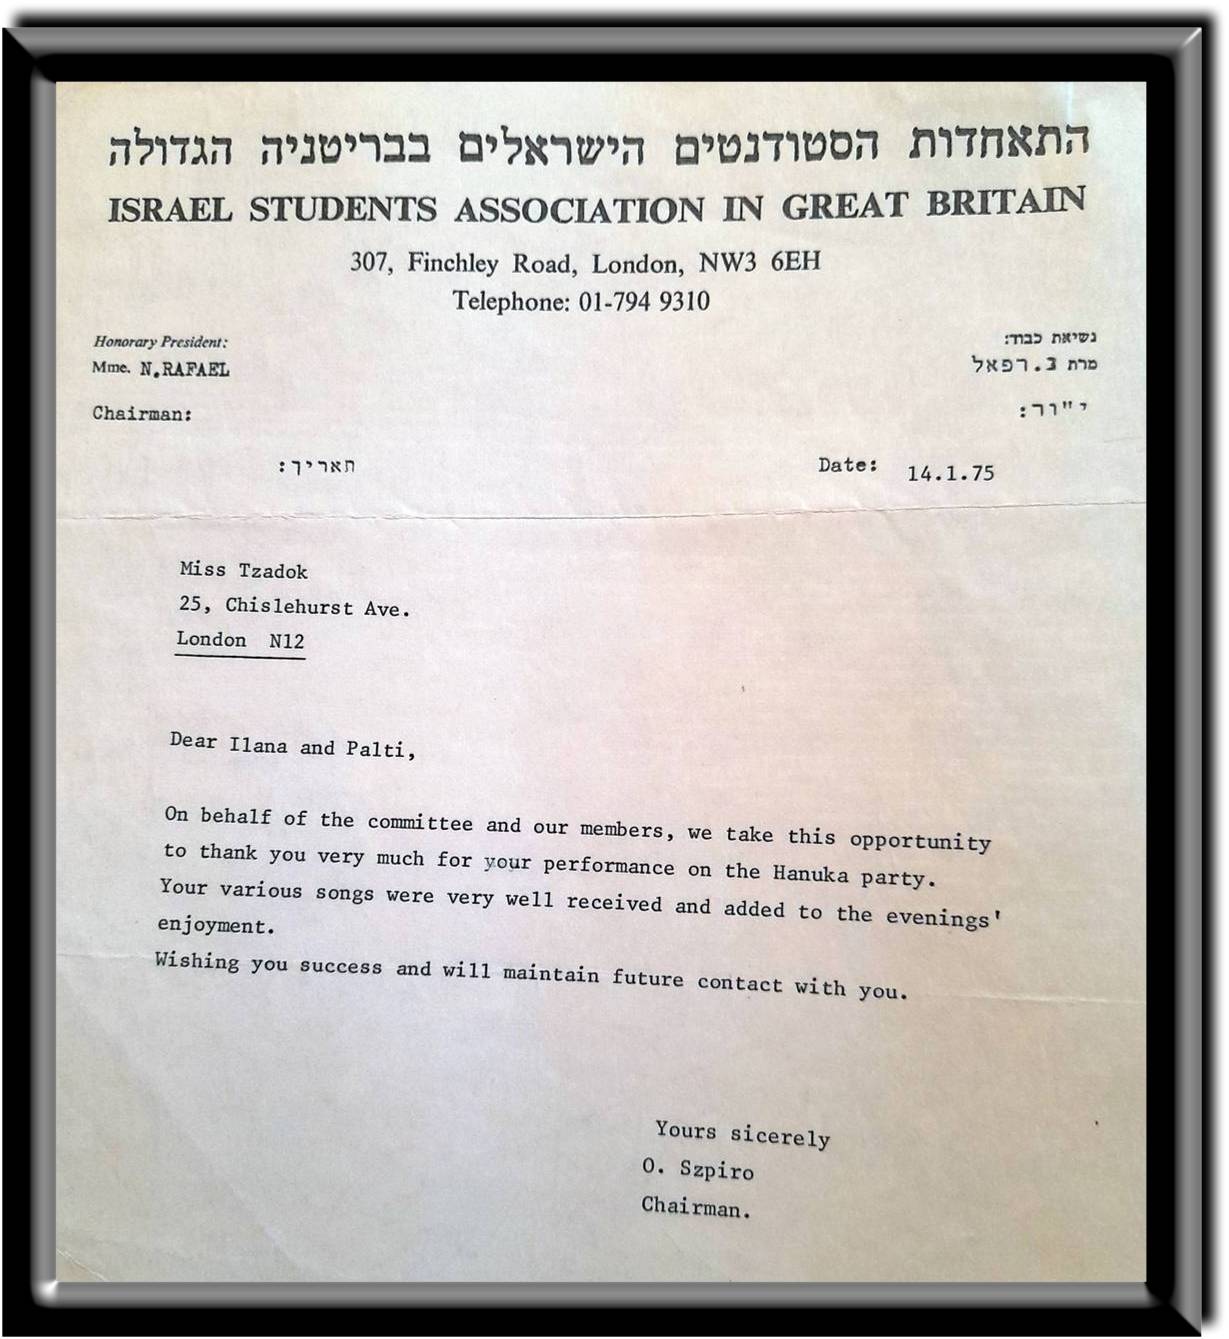 Letter of recommendation of 1975 by O. Szpiro, chairman of the Israel Students Association in Great Britain.